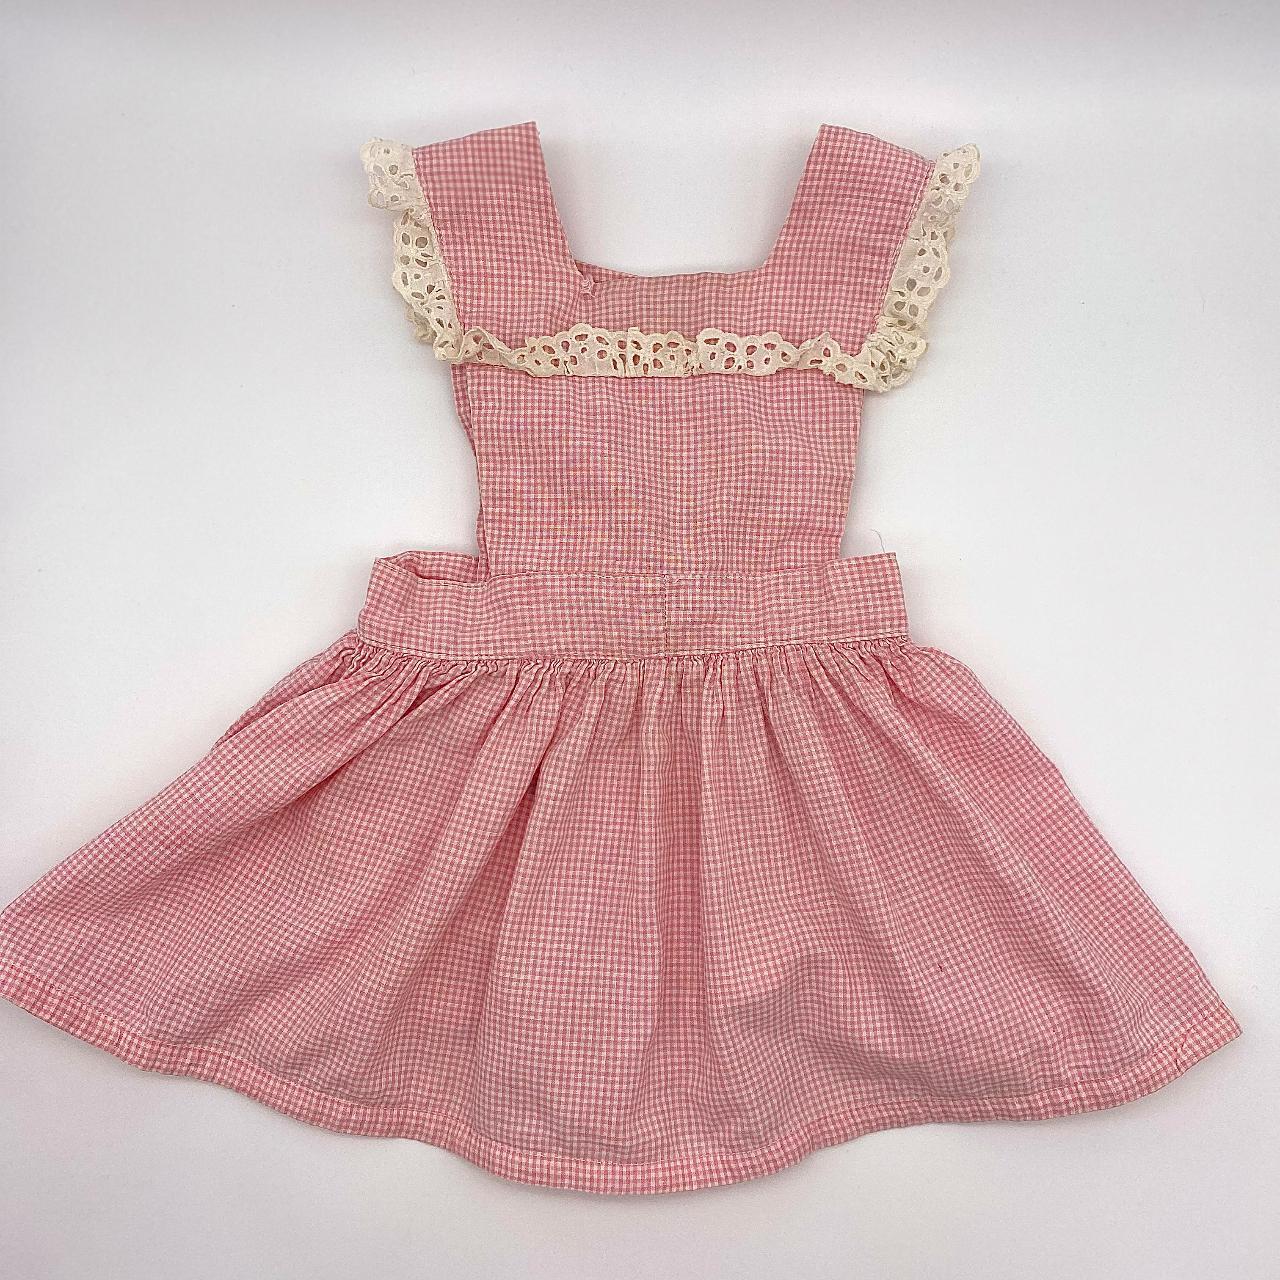 Vintage 1950s Baby Dress - Pink and White Small... - Depop